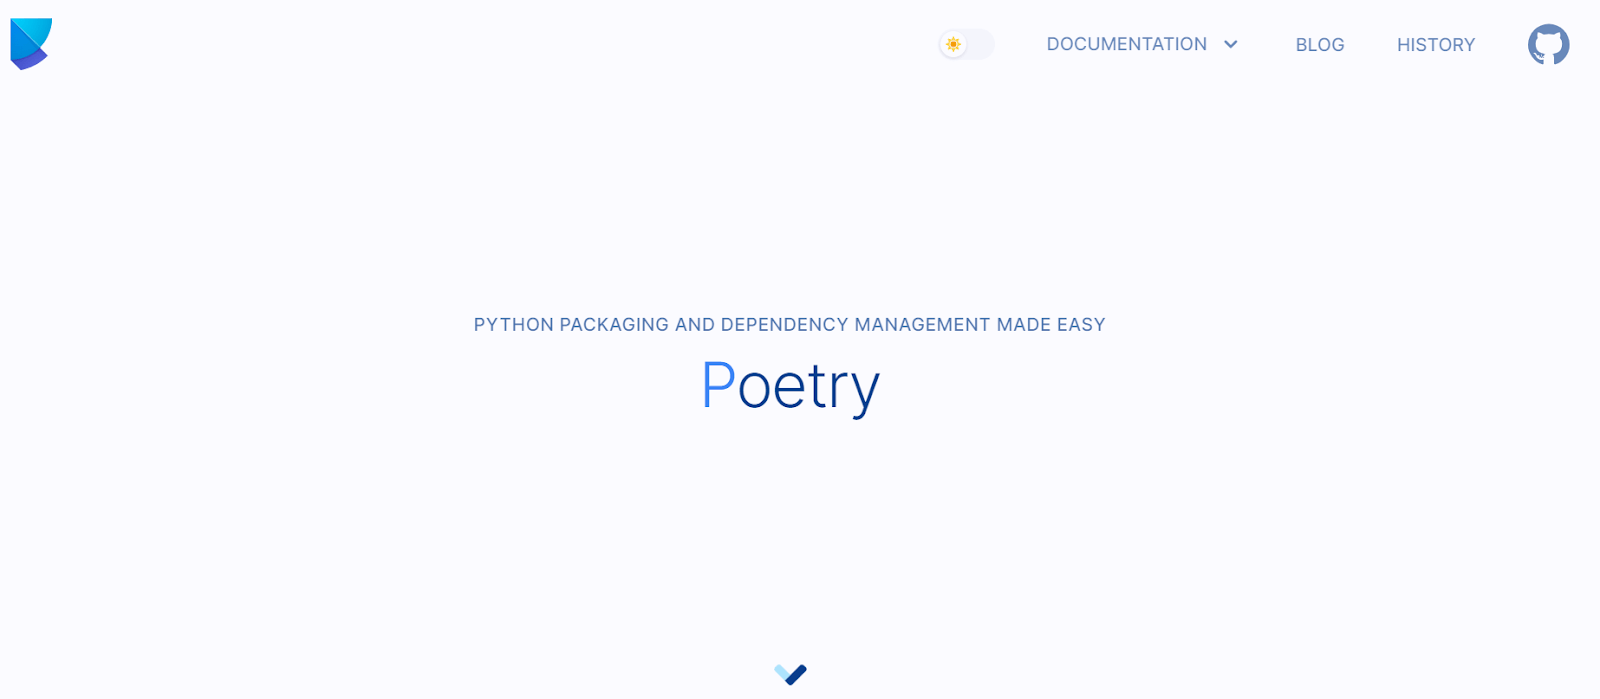 Poetry is a modern Python build tool